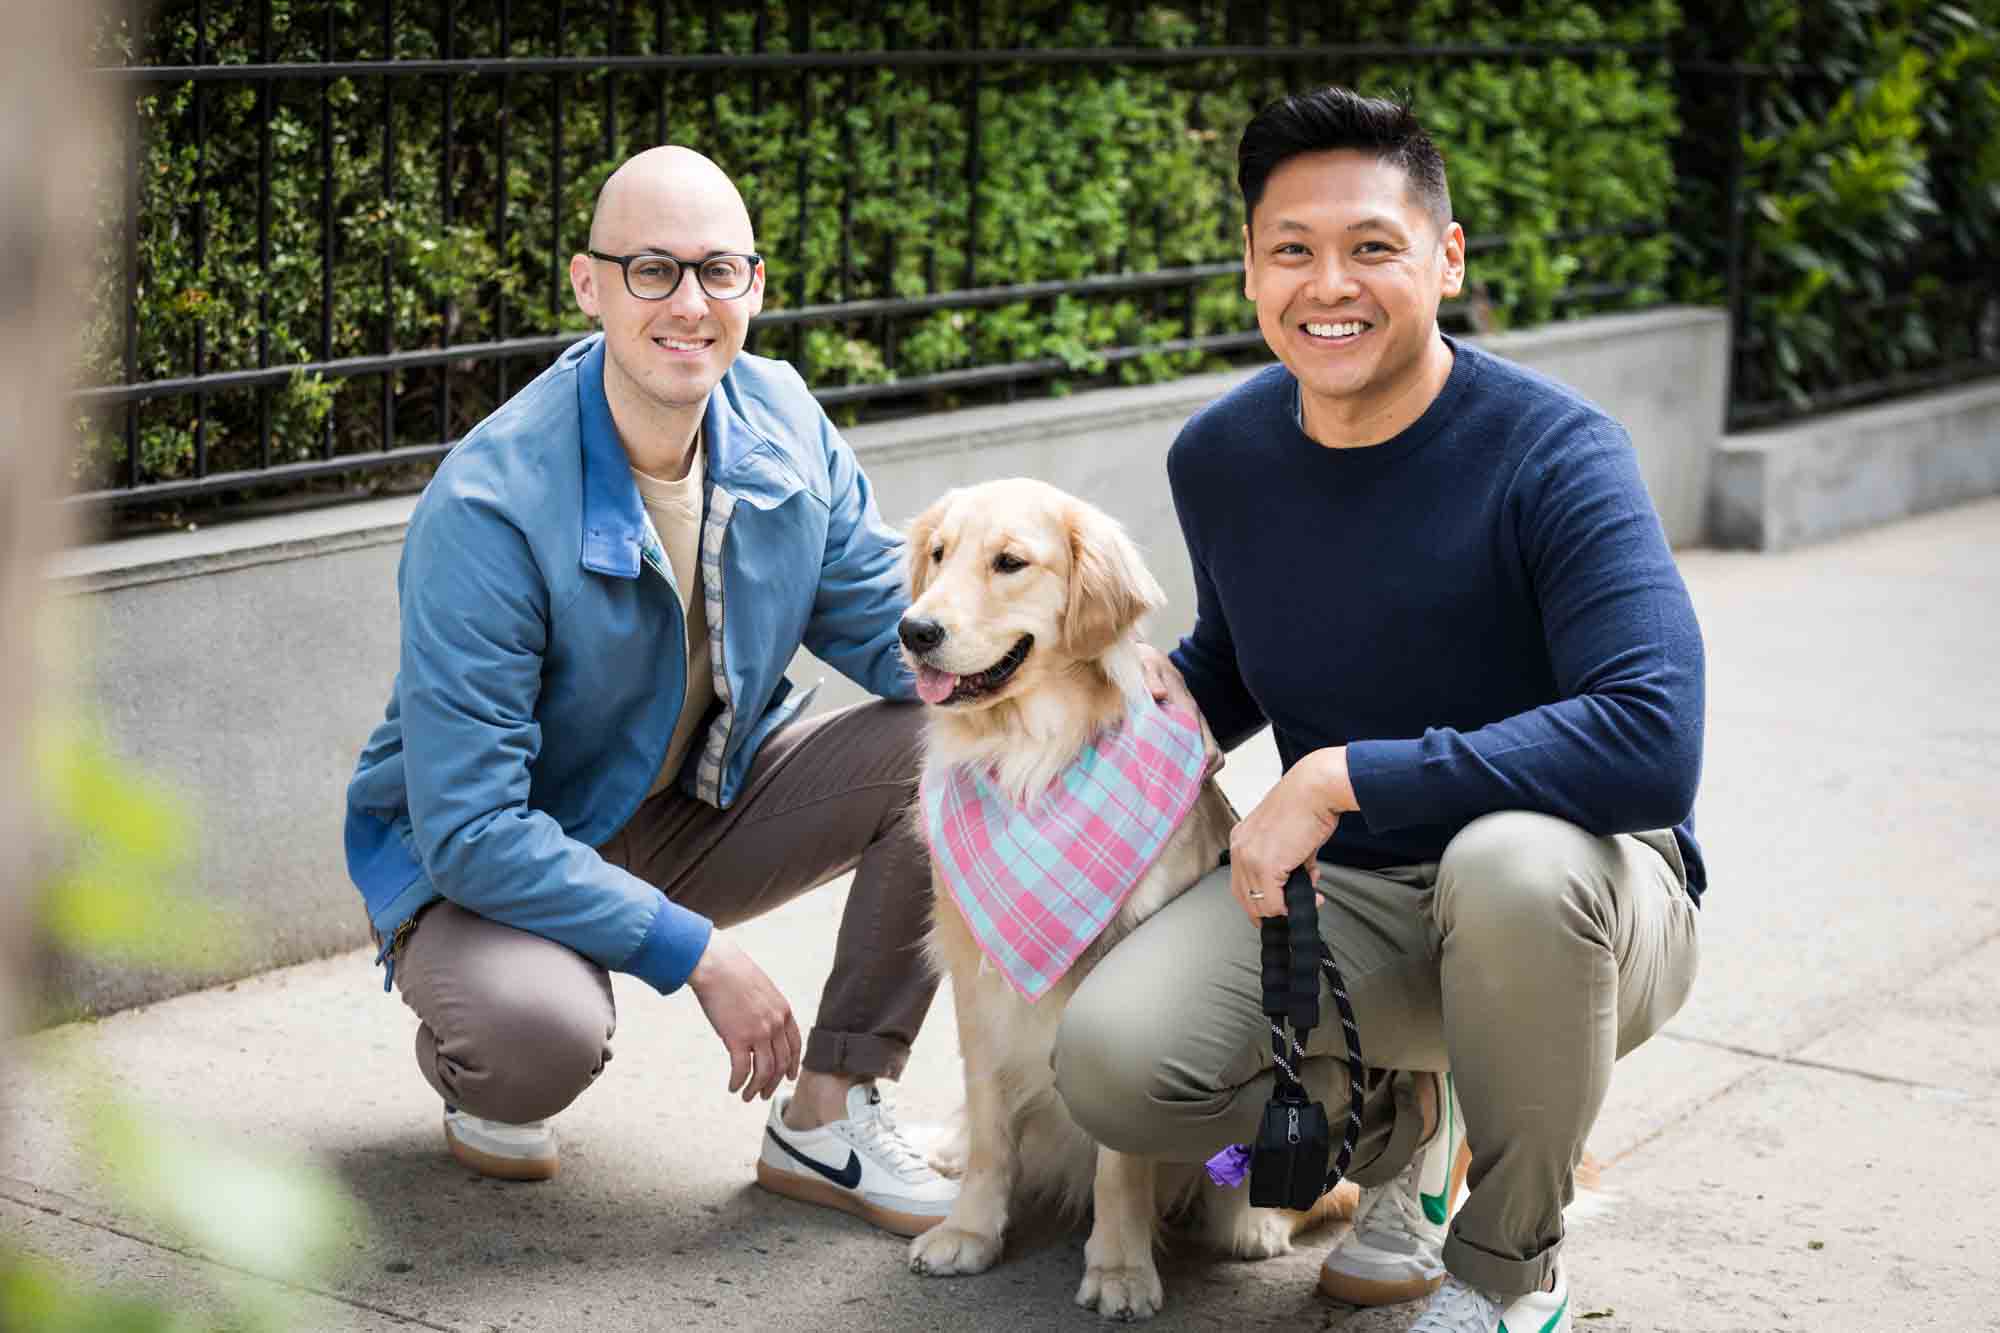 Two men squatting beside a golden retriever from a Central Park engagement photo shoot